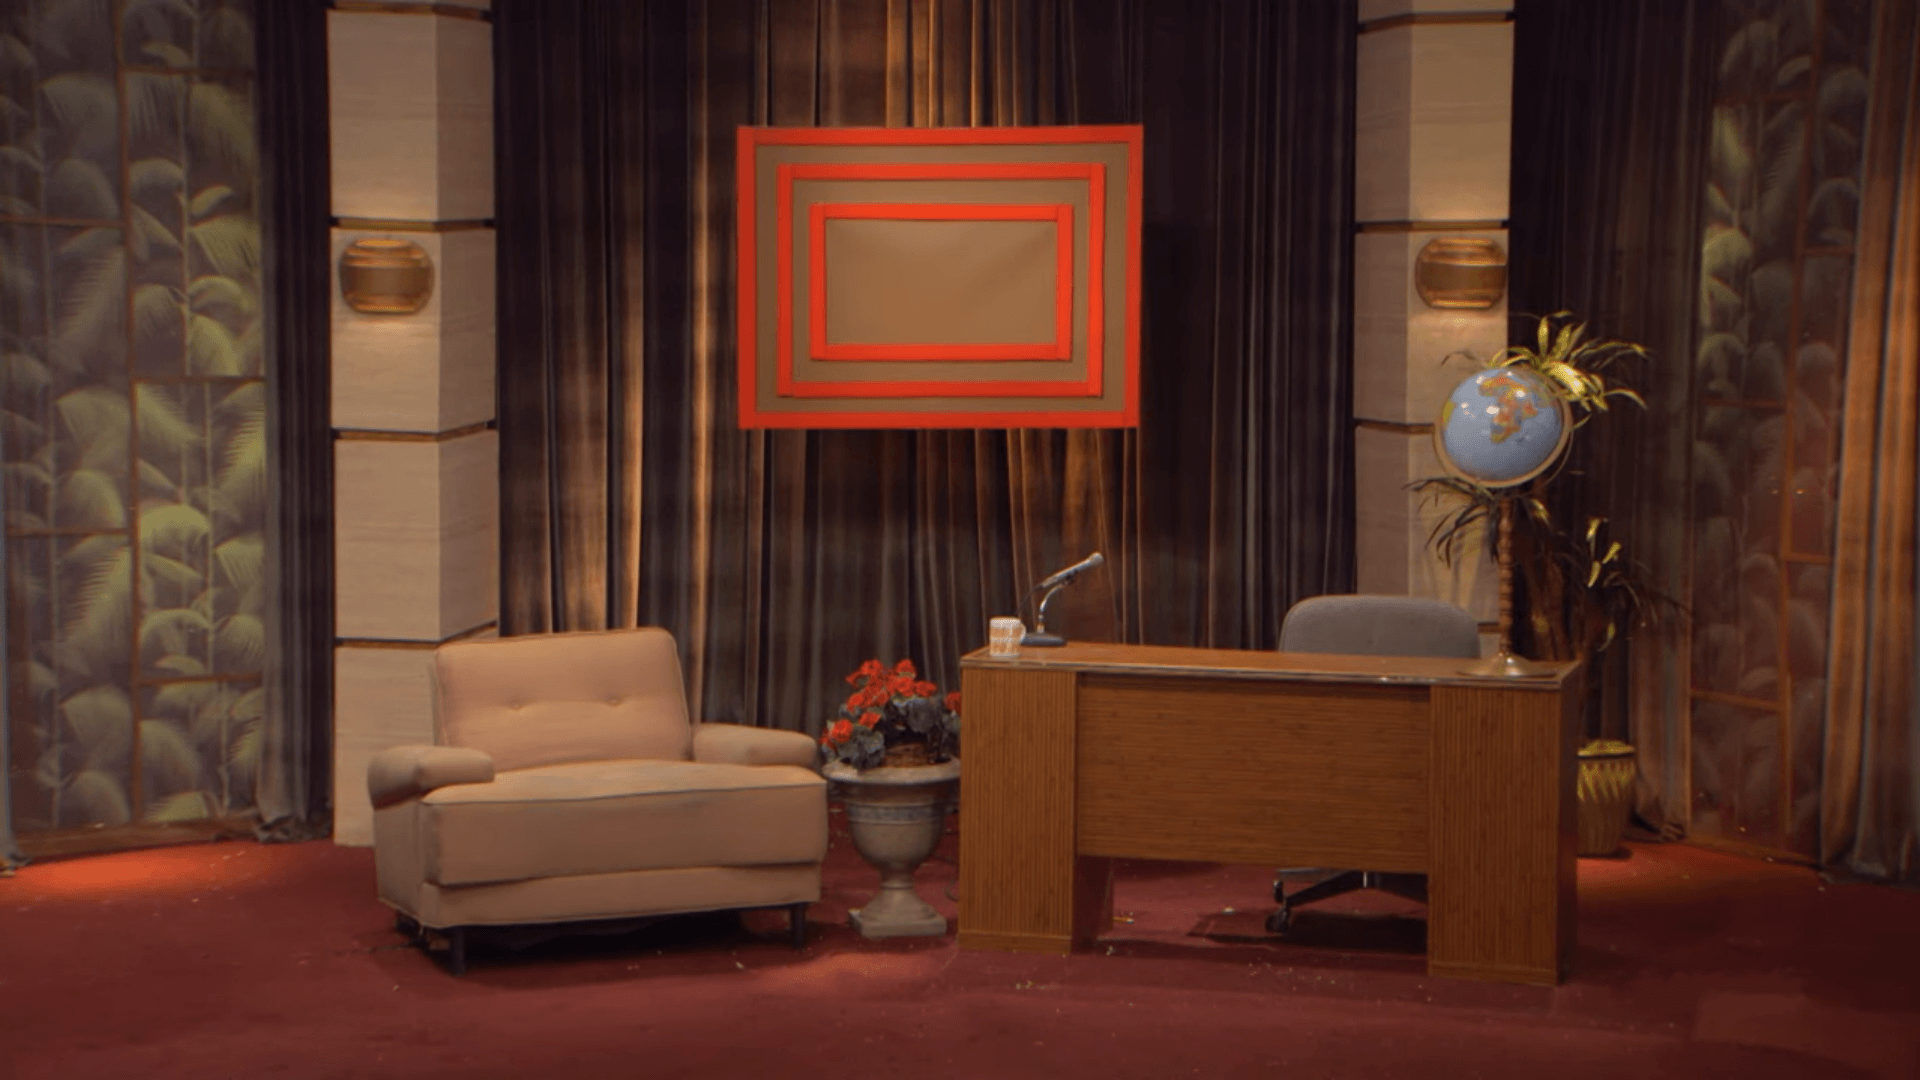 The Eric Andre Show Set Wallpaper (1920 x 1080)